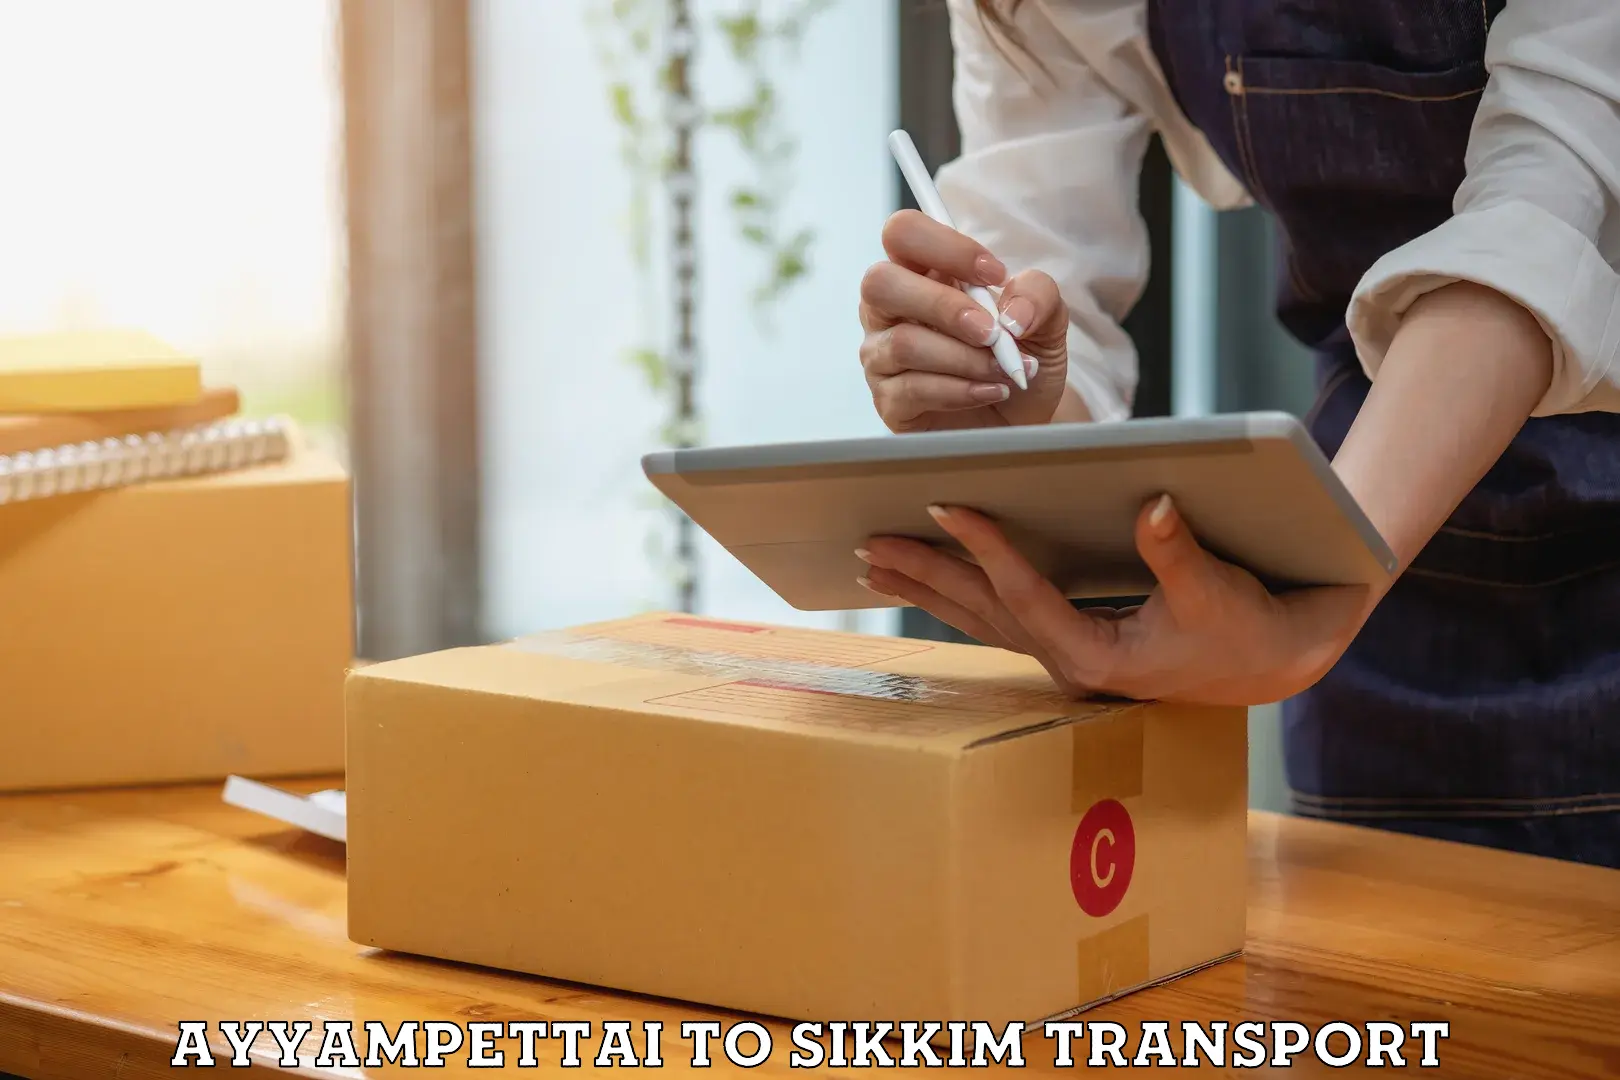 Container transport service Ayyampettai to Sikkim